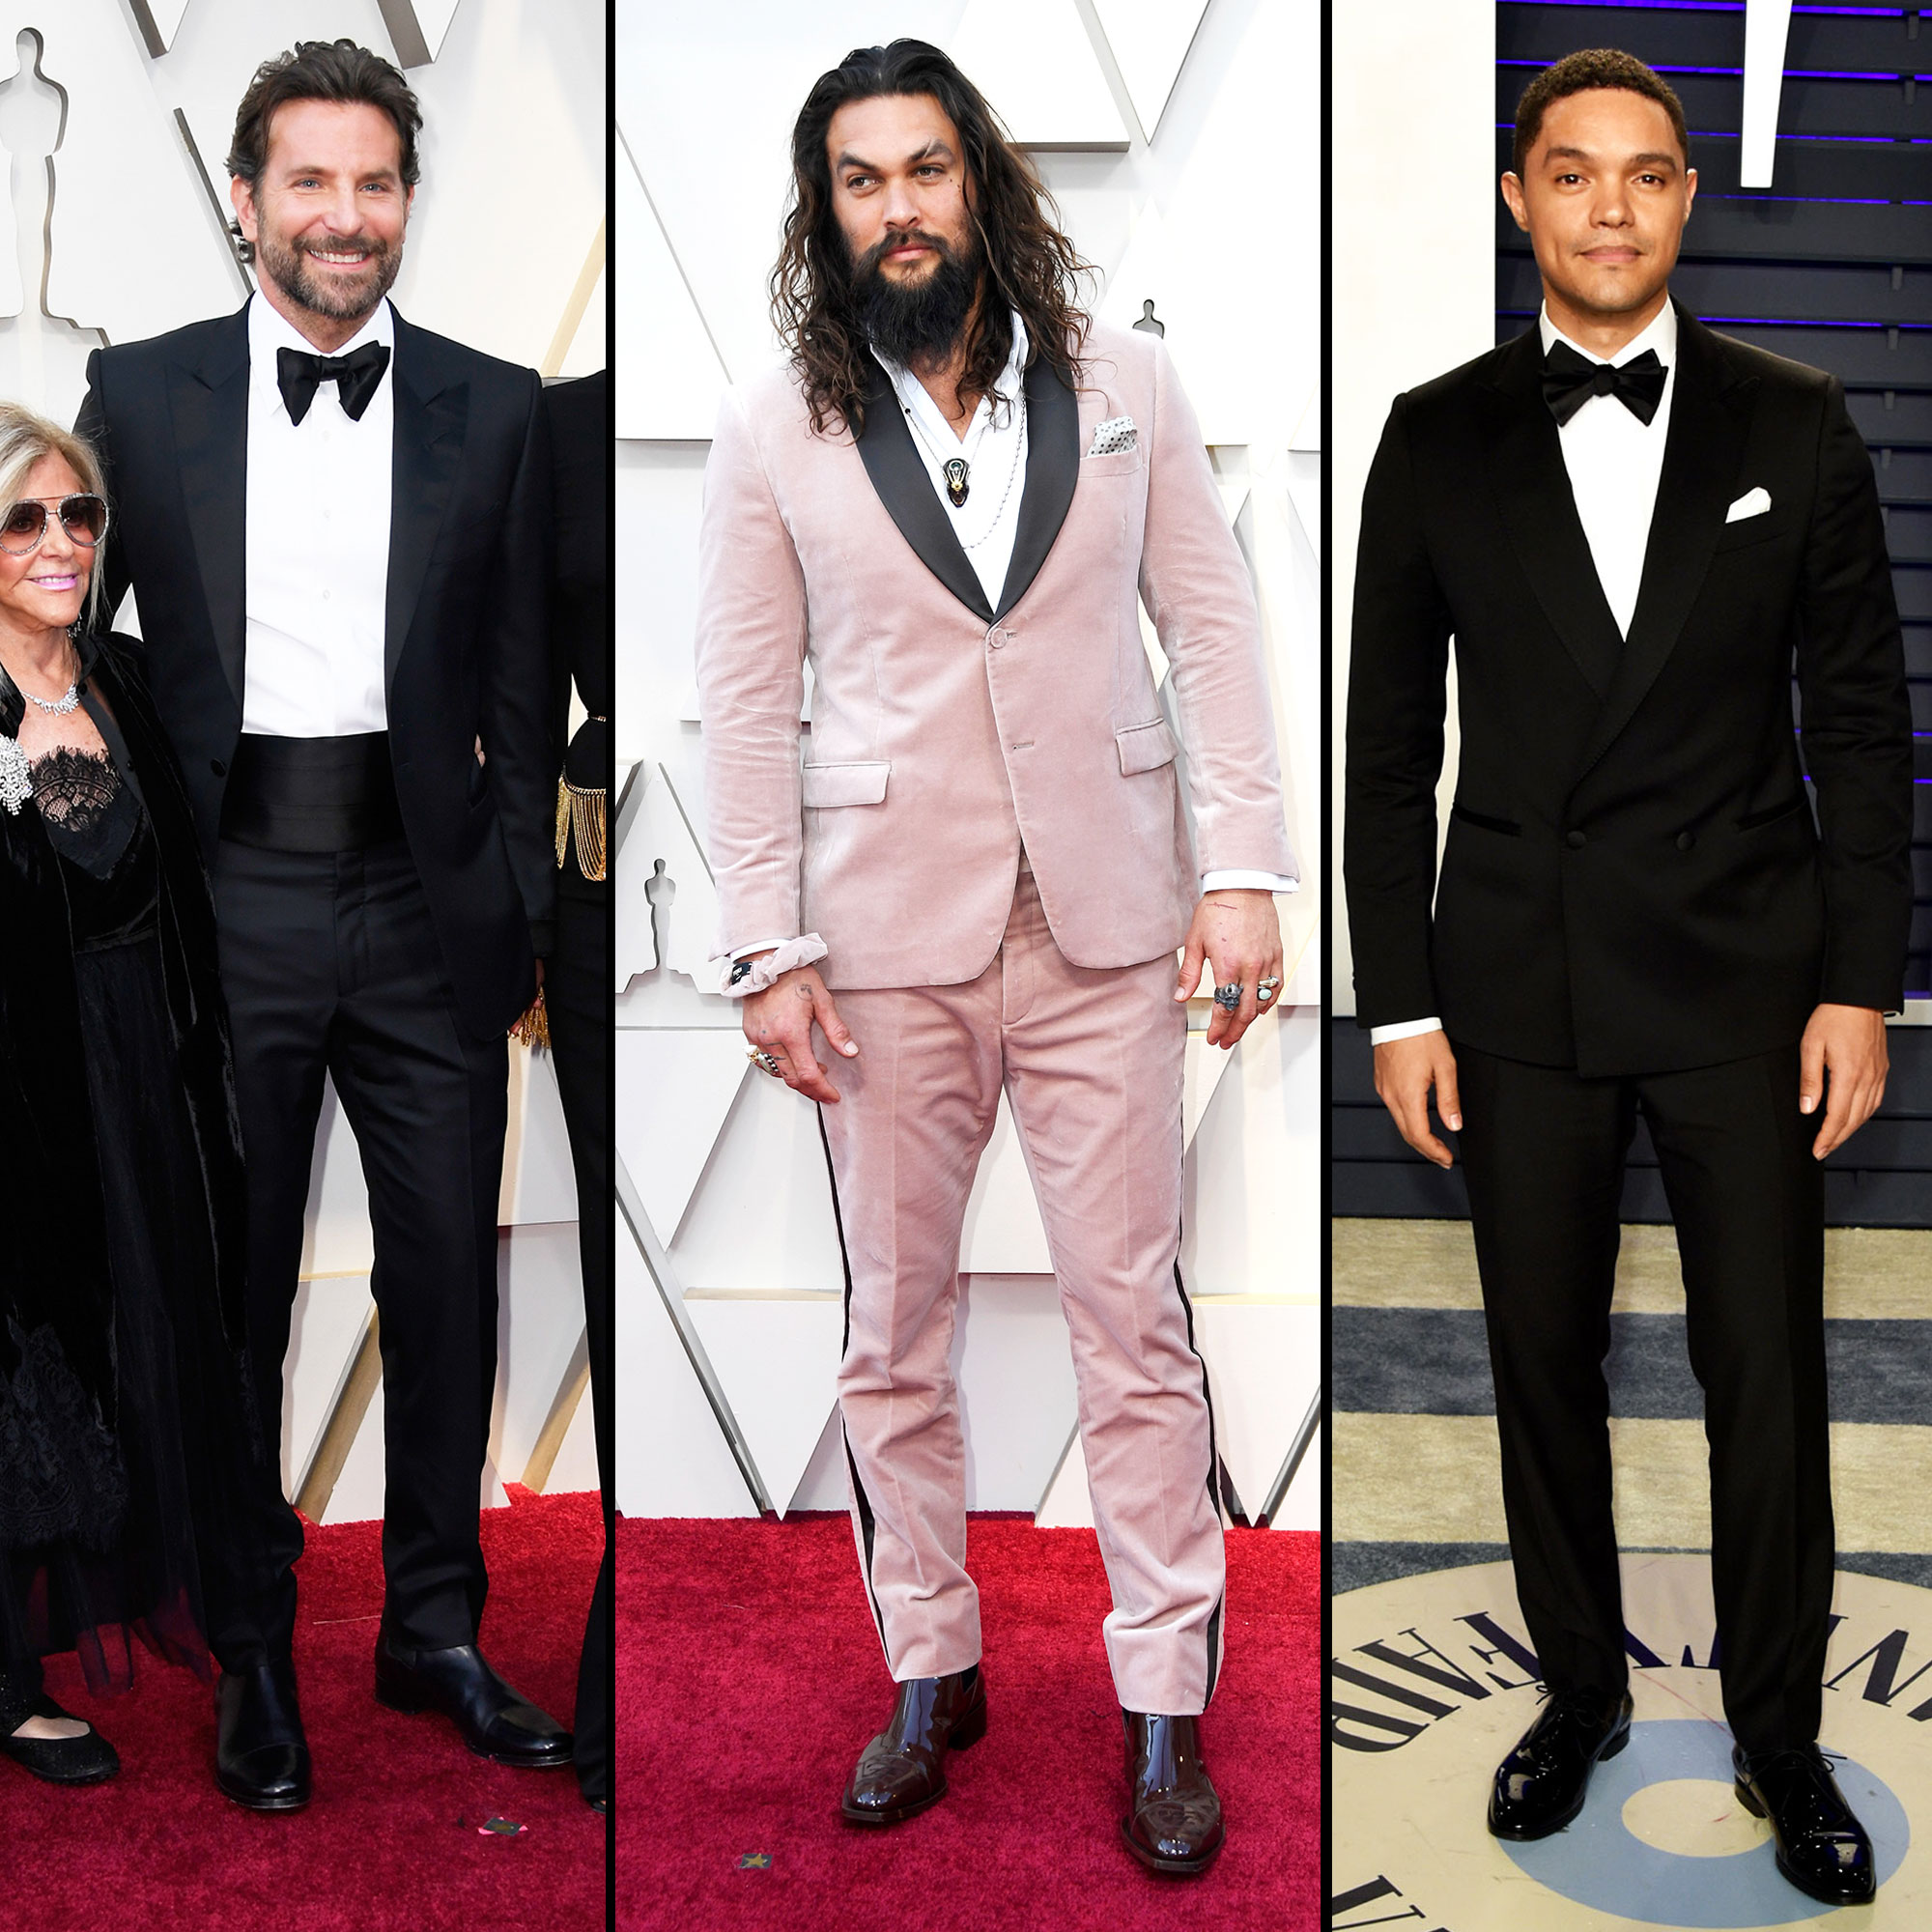 Oscars 2019 Red Carpet Fashion: Hot Men In Suits, Tuxes